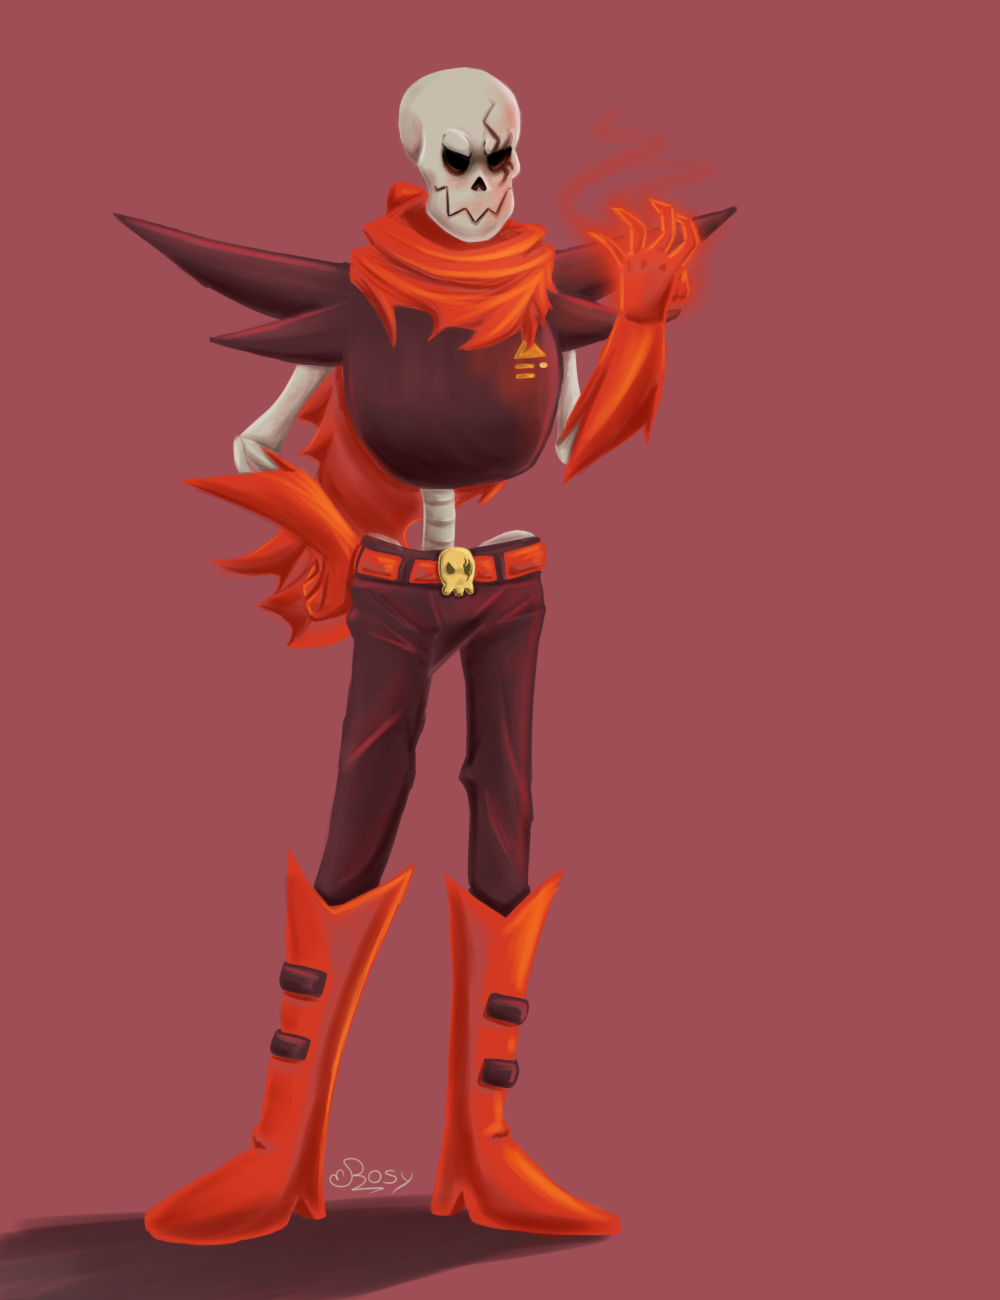 Underfell Papyrus by Rosy-forever on DeviantArt